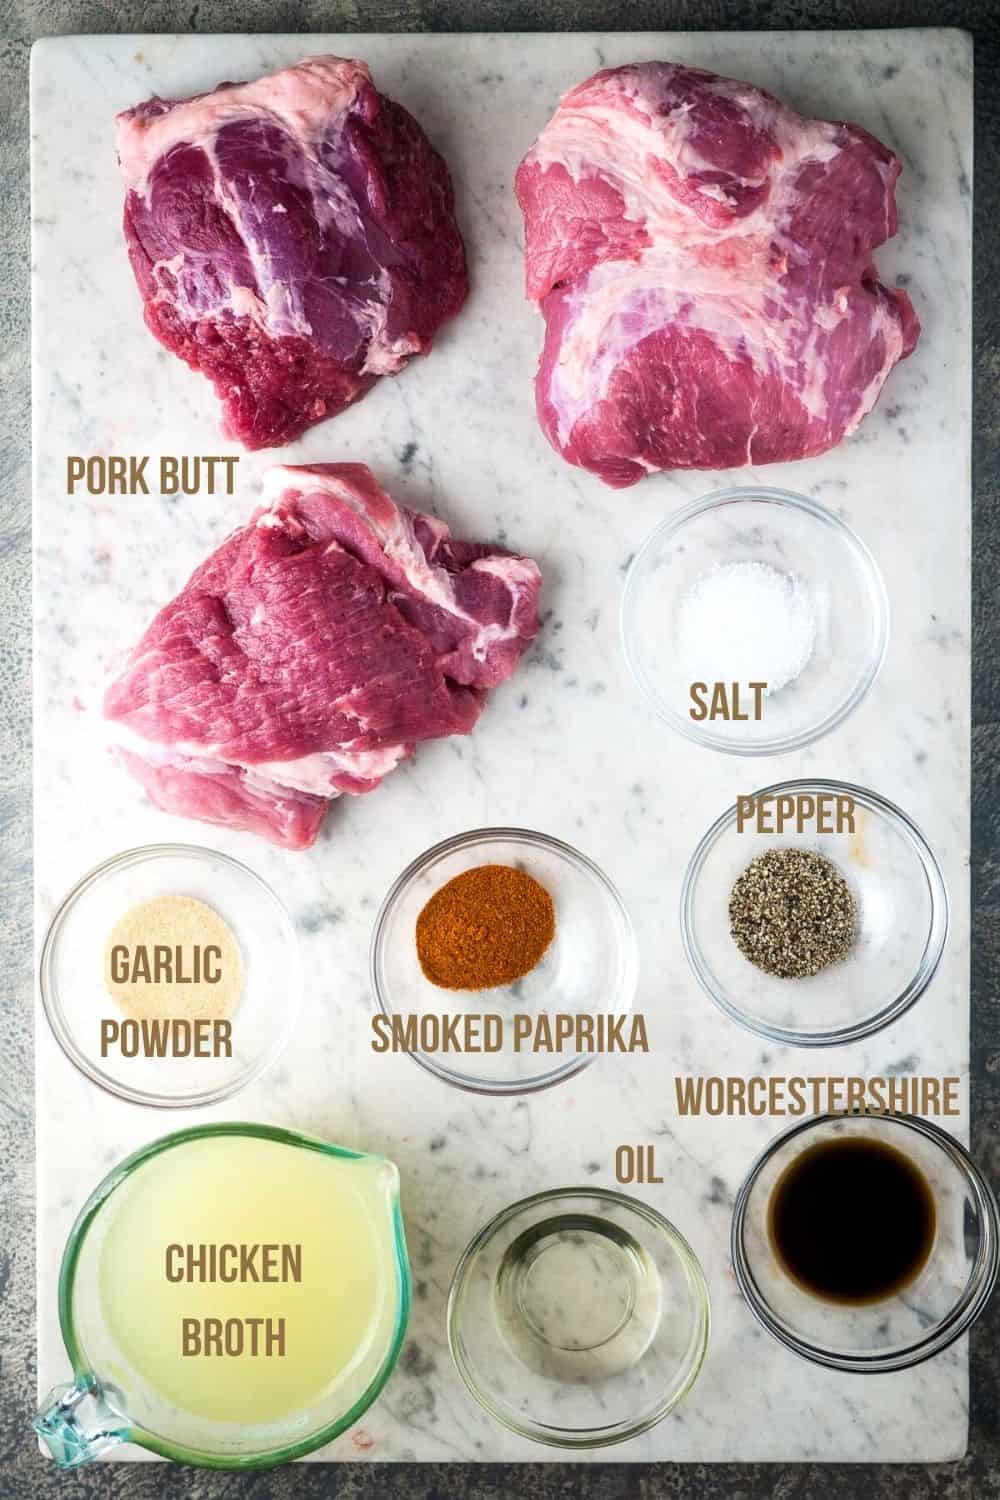 pulled pork ingredients measured and labeled by name